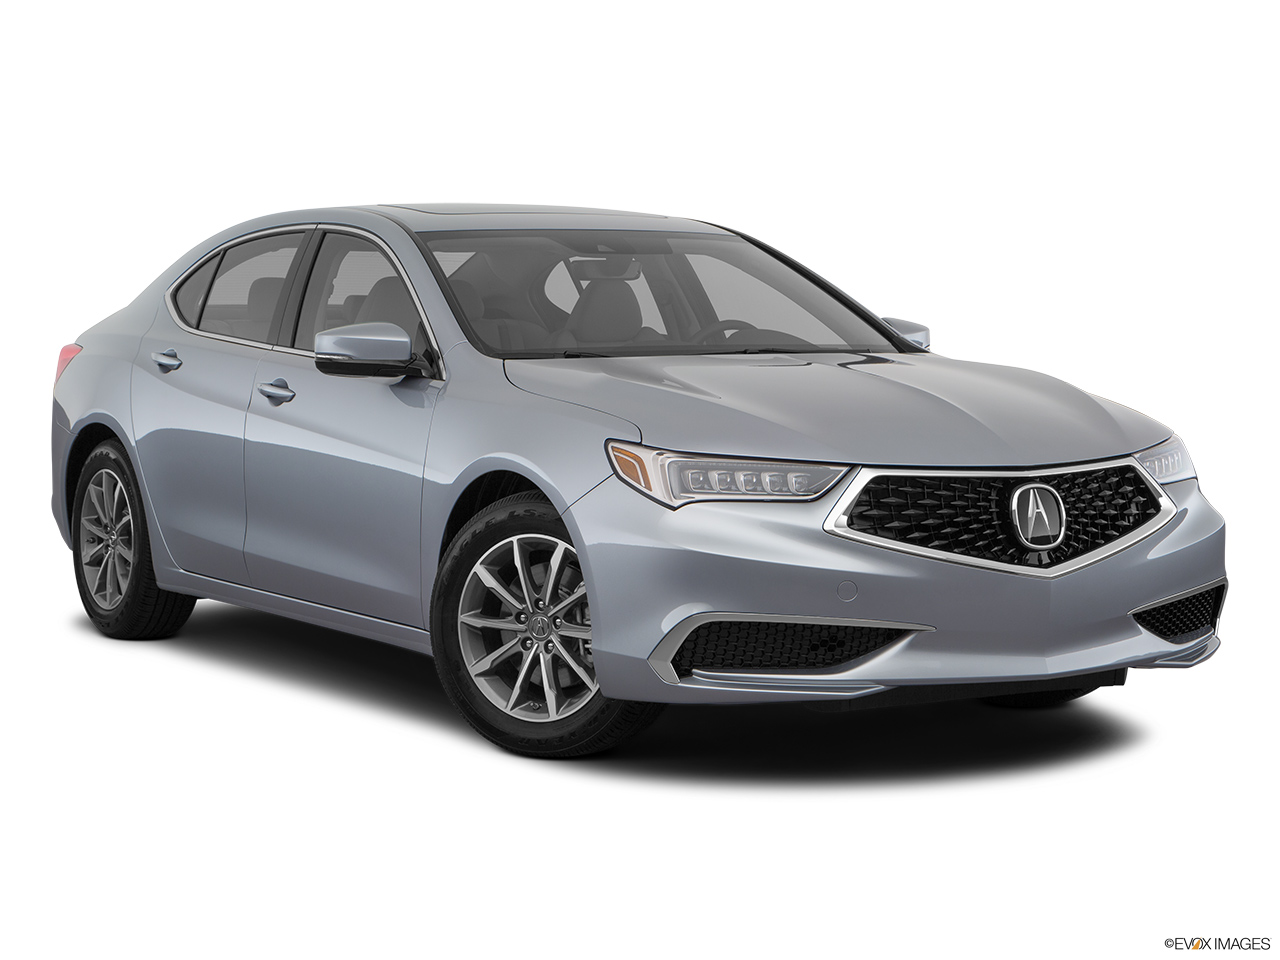 2019 Acura TLX 2.4 8-DCT P-AWS Front passenger 3/4 w/ wheels turned. 